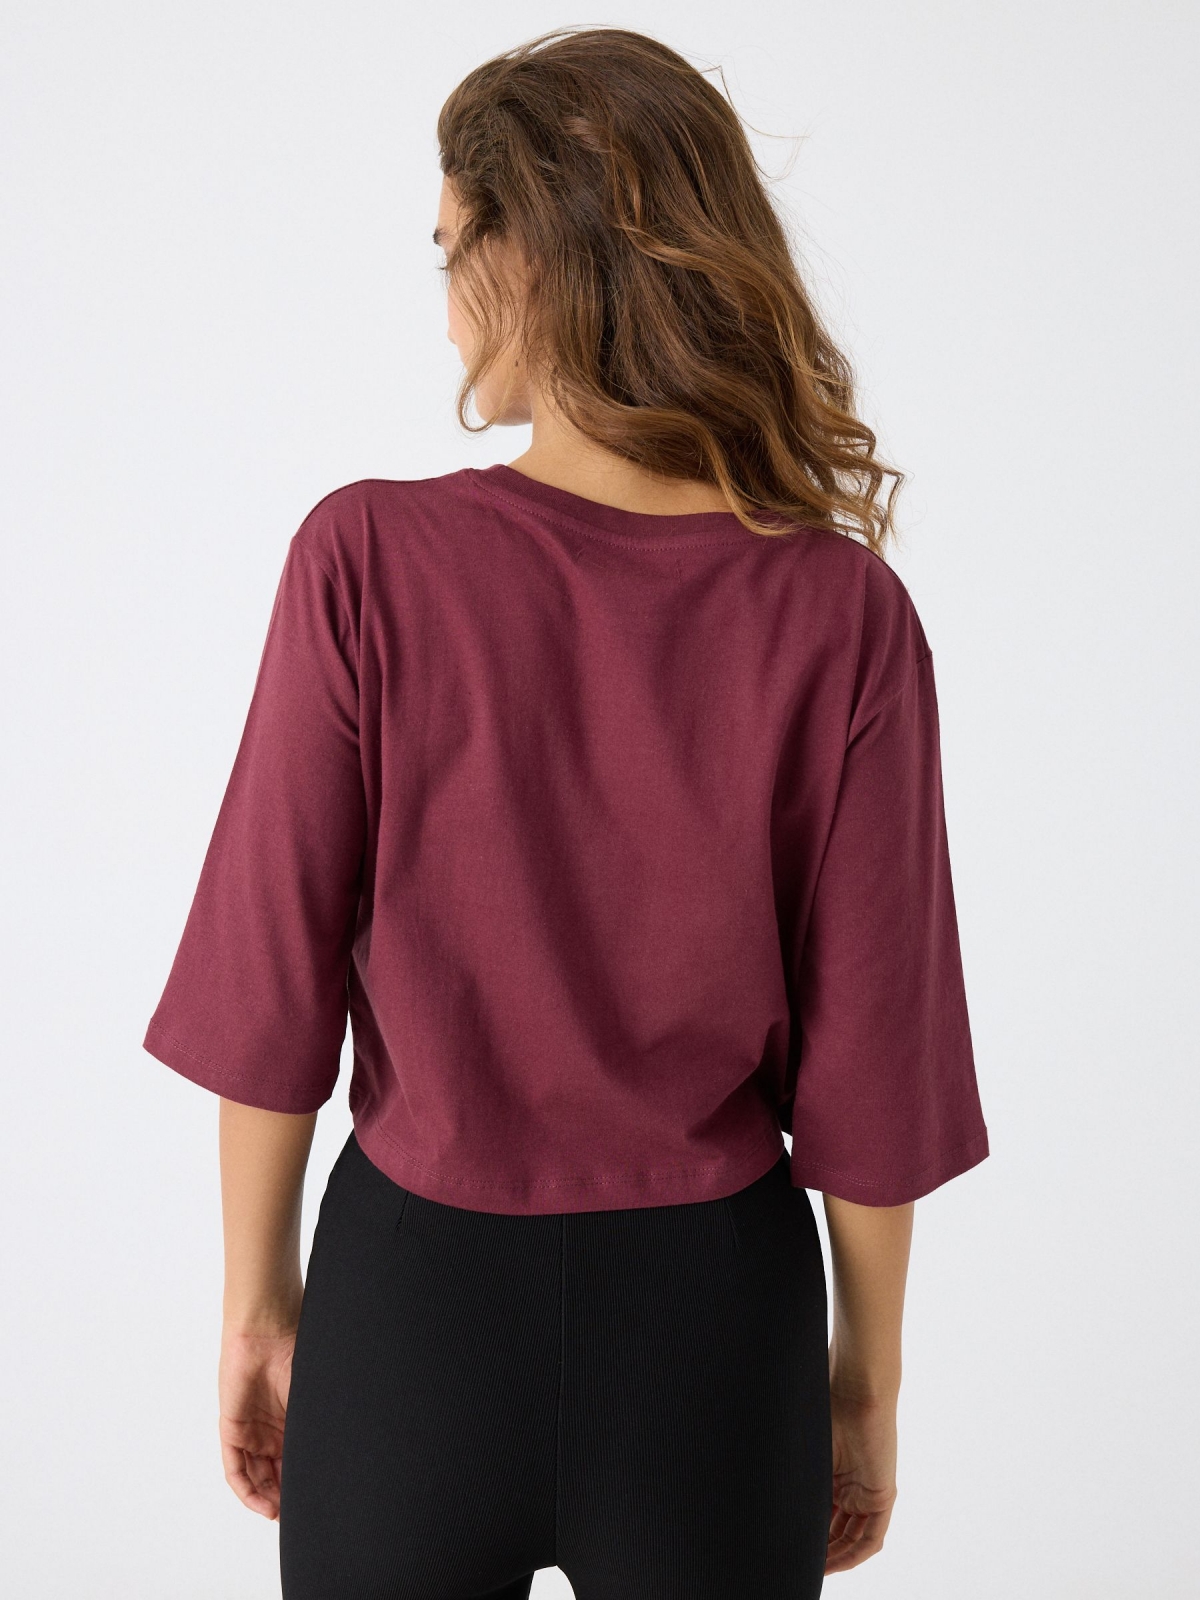 T-shirt with print burgundy middle back view